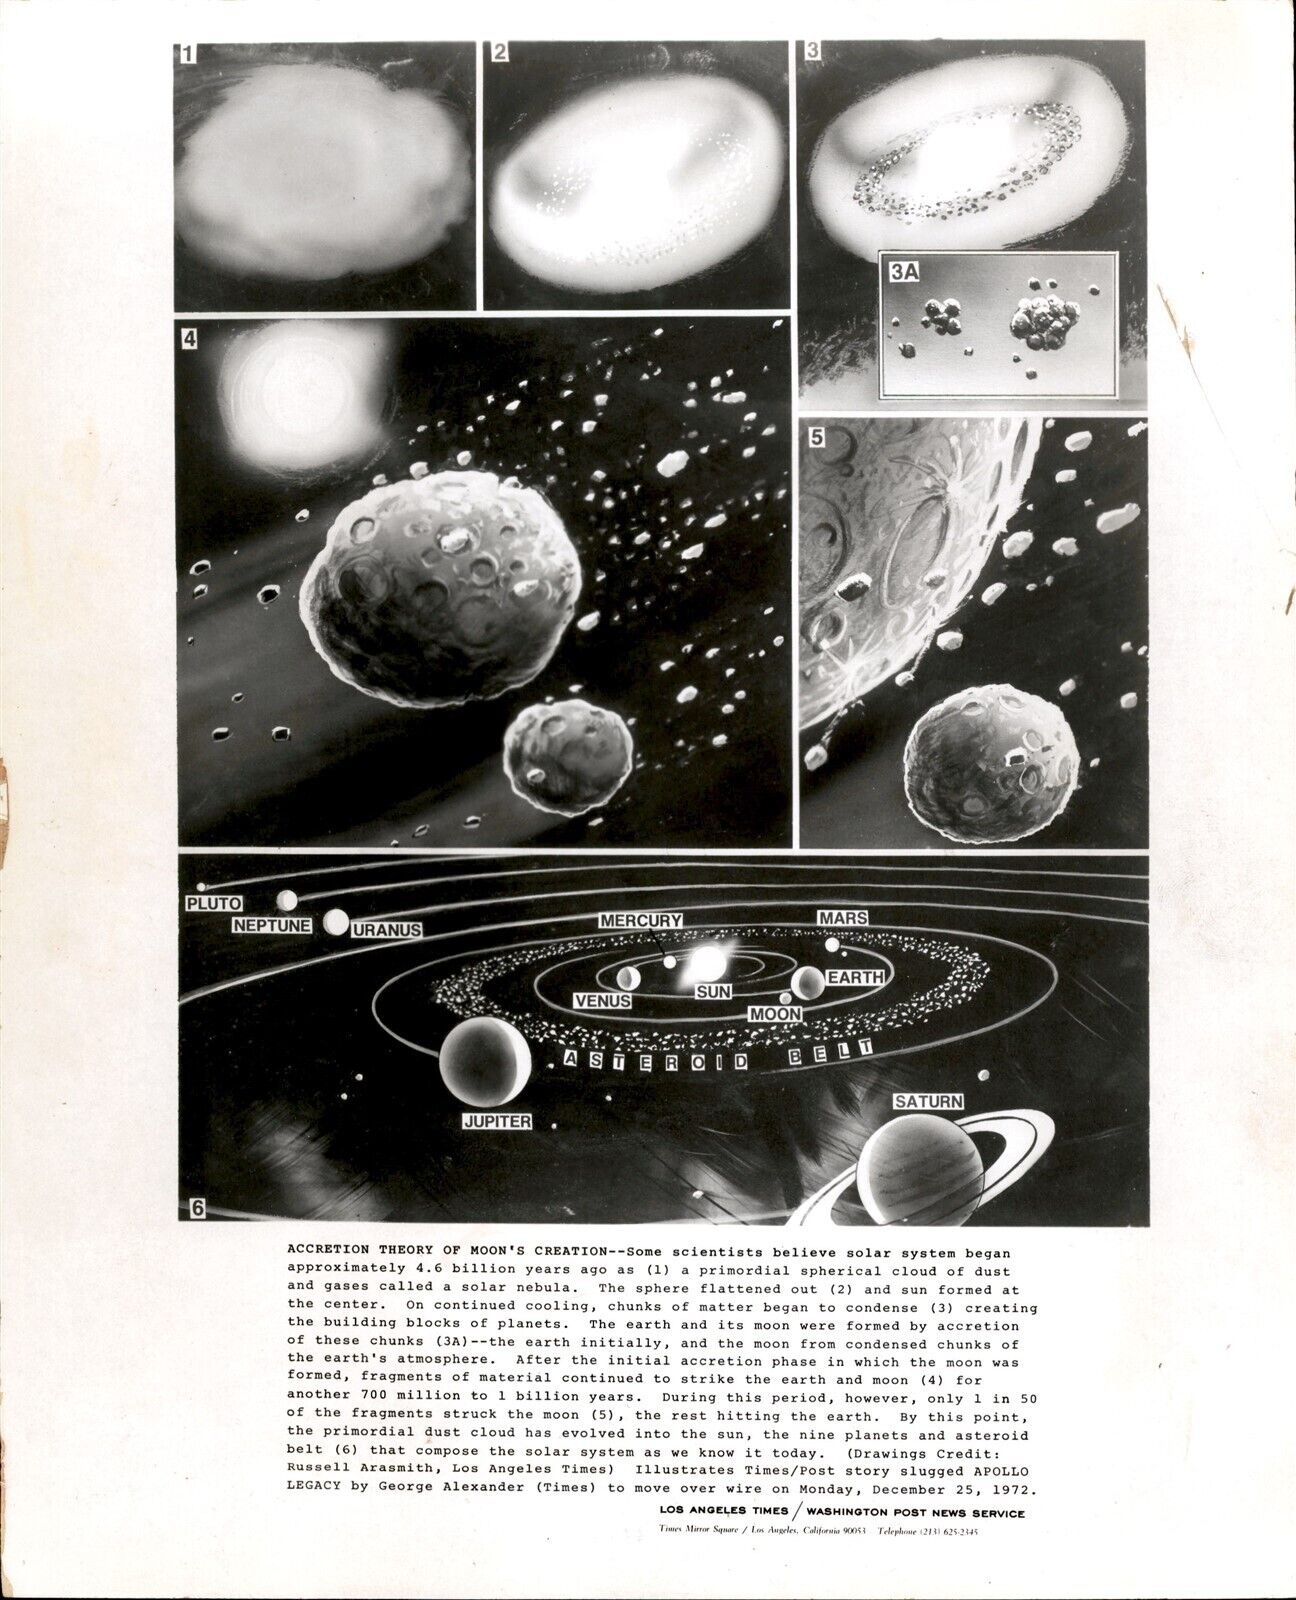 LG21 1972 Orig Photo ACCRETION THEORY OF MOON\'S CREATION SOLAR SYSTEM FORMATION